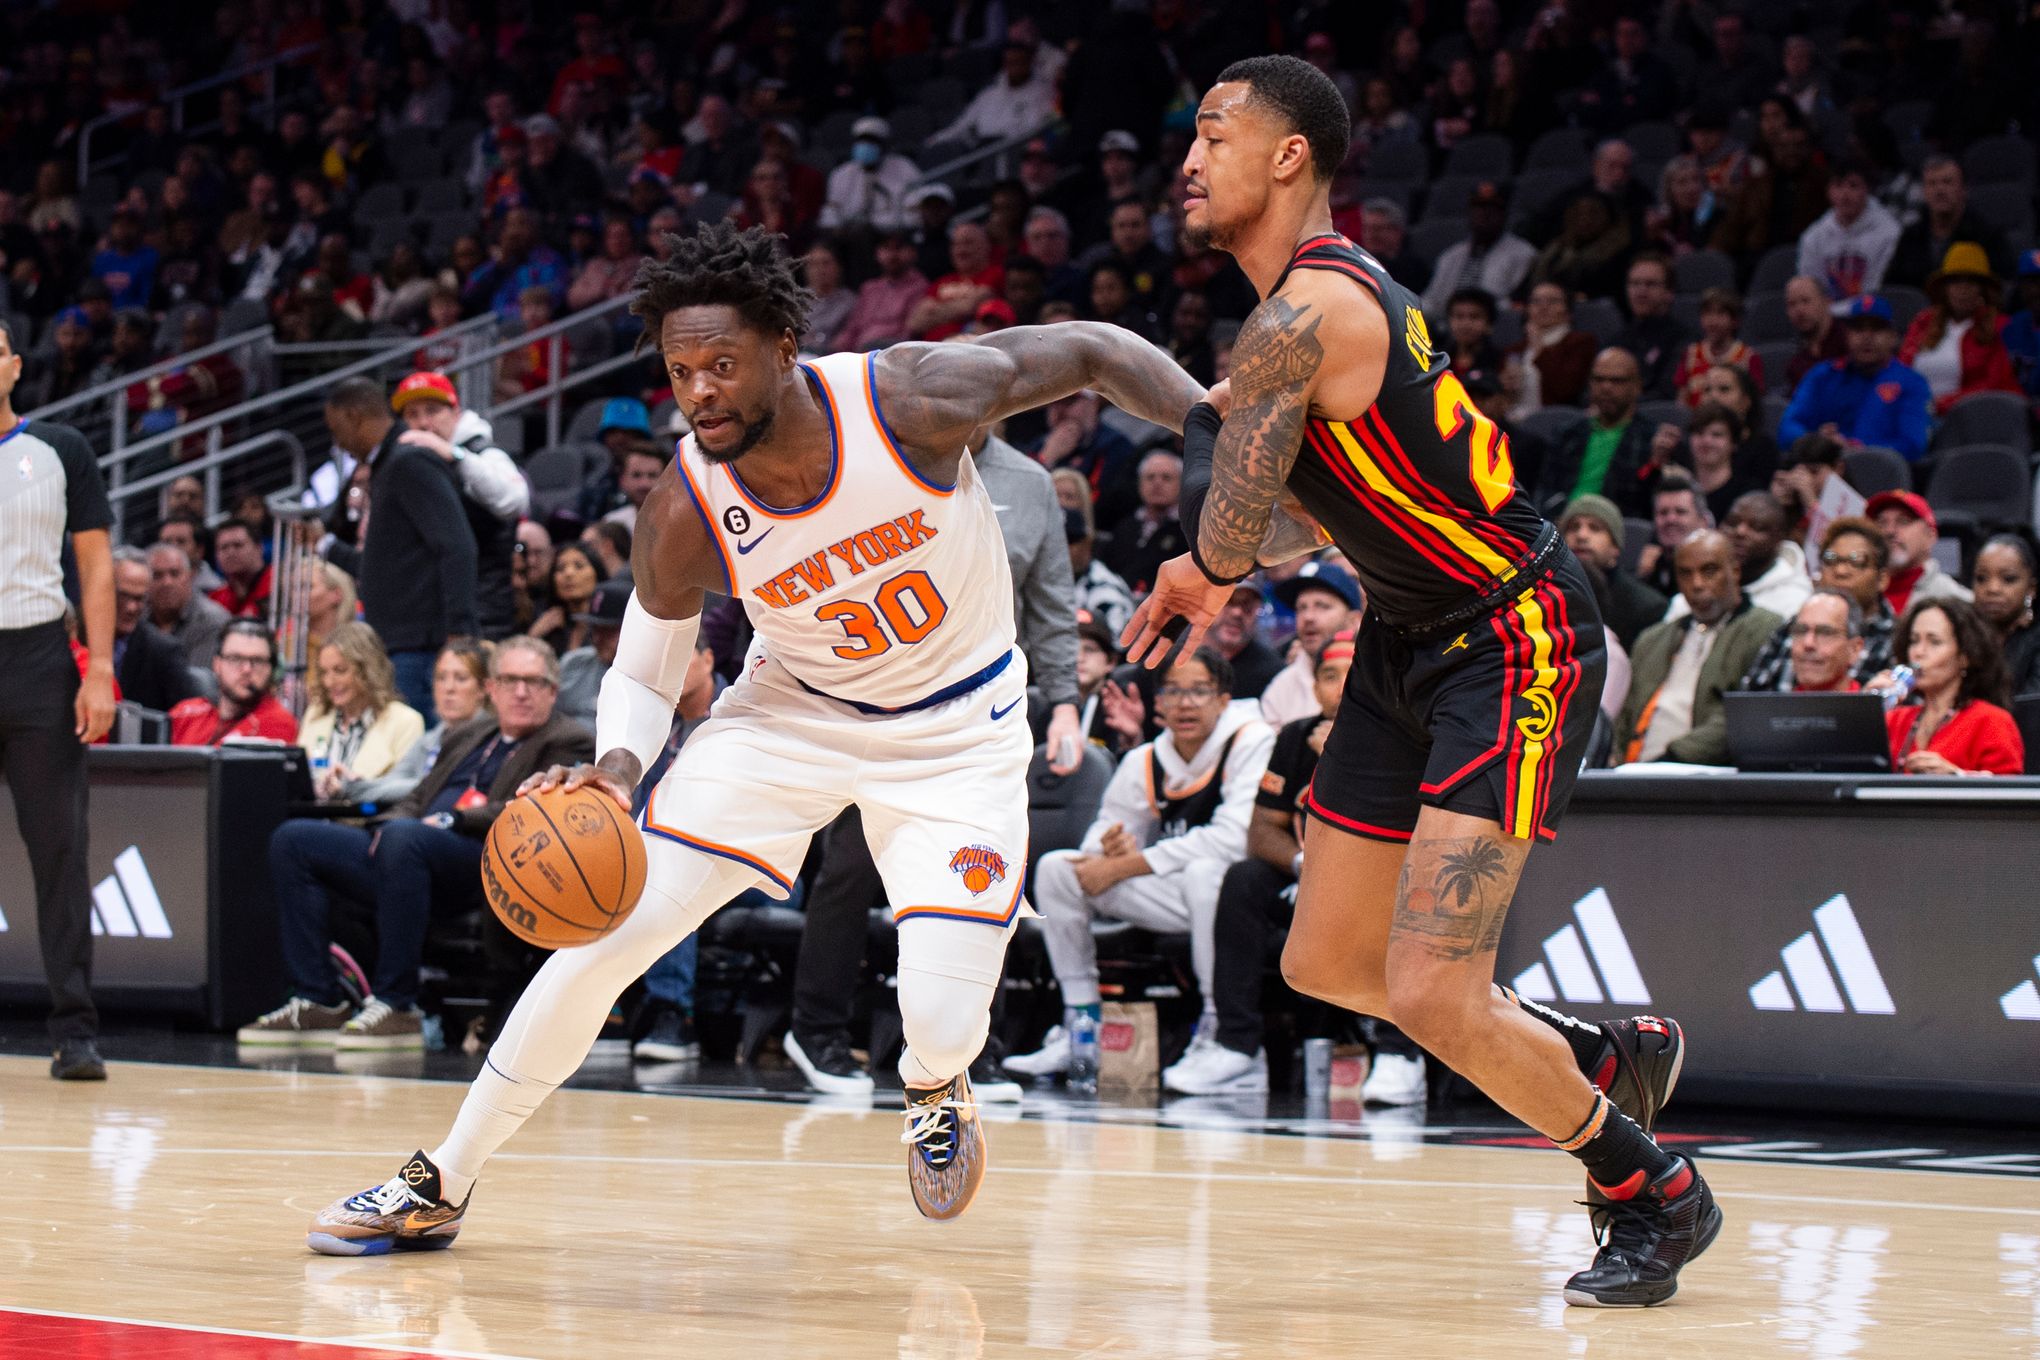 New York Basketball on X: Mitchell Robinson QUESTIONABLE for